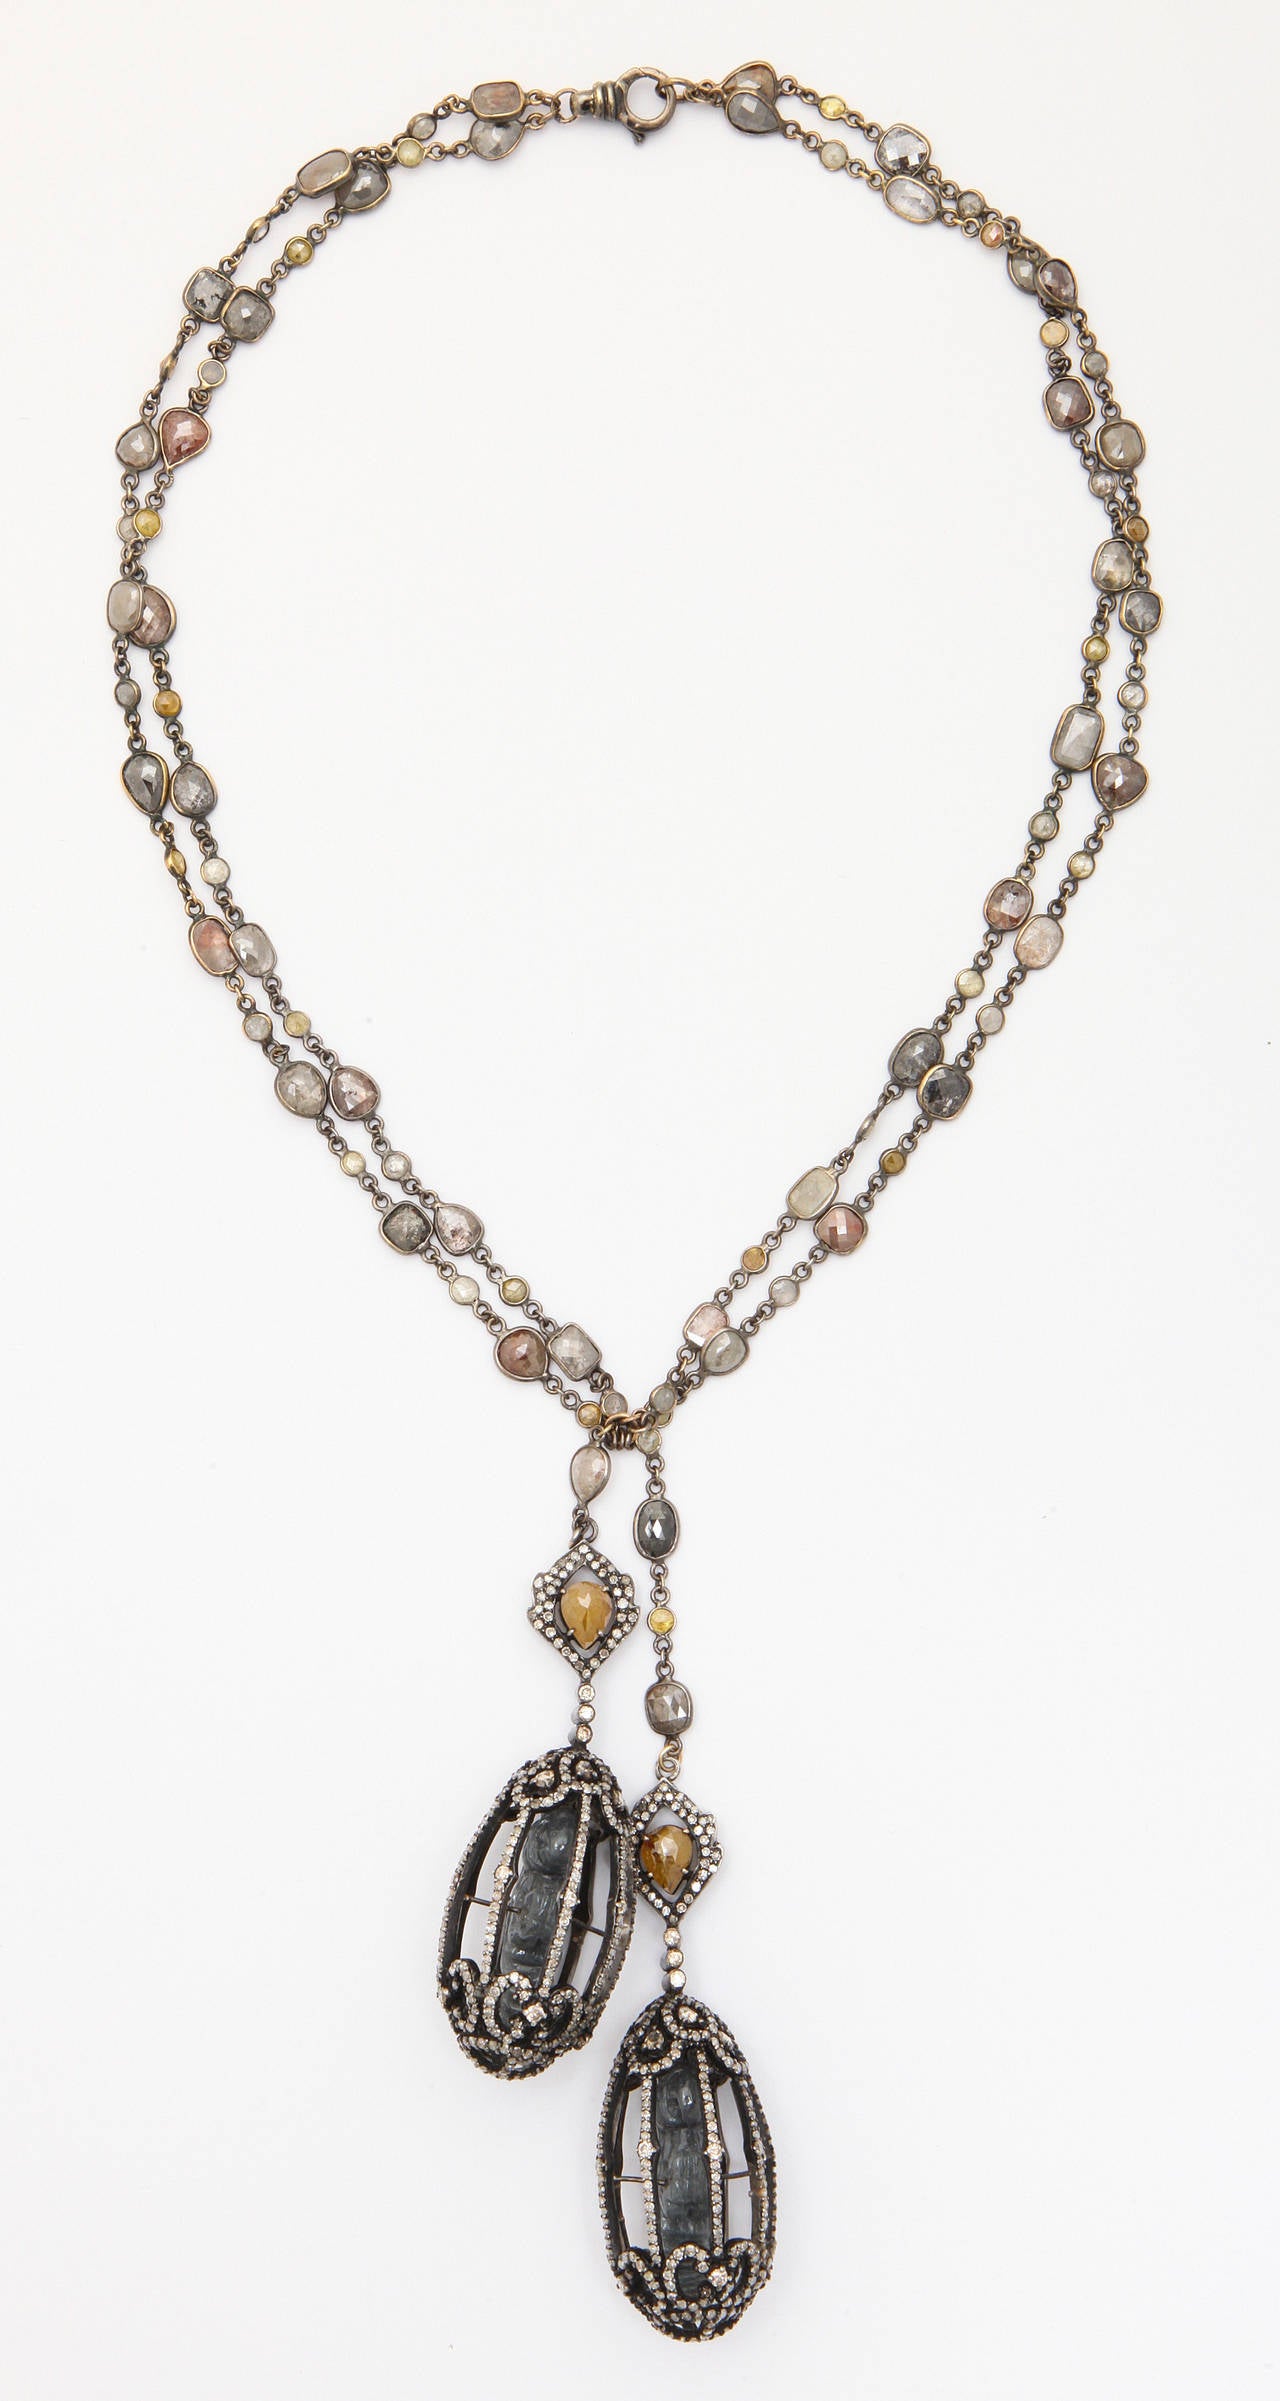 A necklace composed of a rhodium plated 18kt yellow gold and fancy rose cut diamond chain and two rhodium plated sterling silver birdcages. The birdcages are set with diamonds and have jade birds perched inside. The necklace has a total of 45.34cts